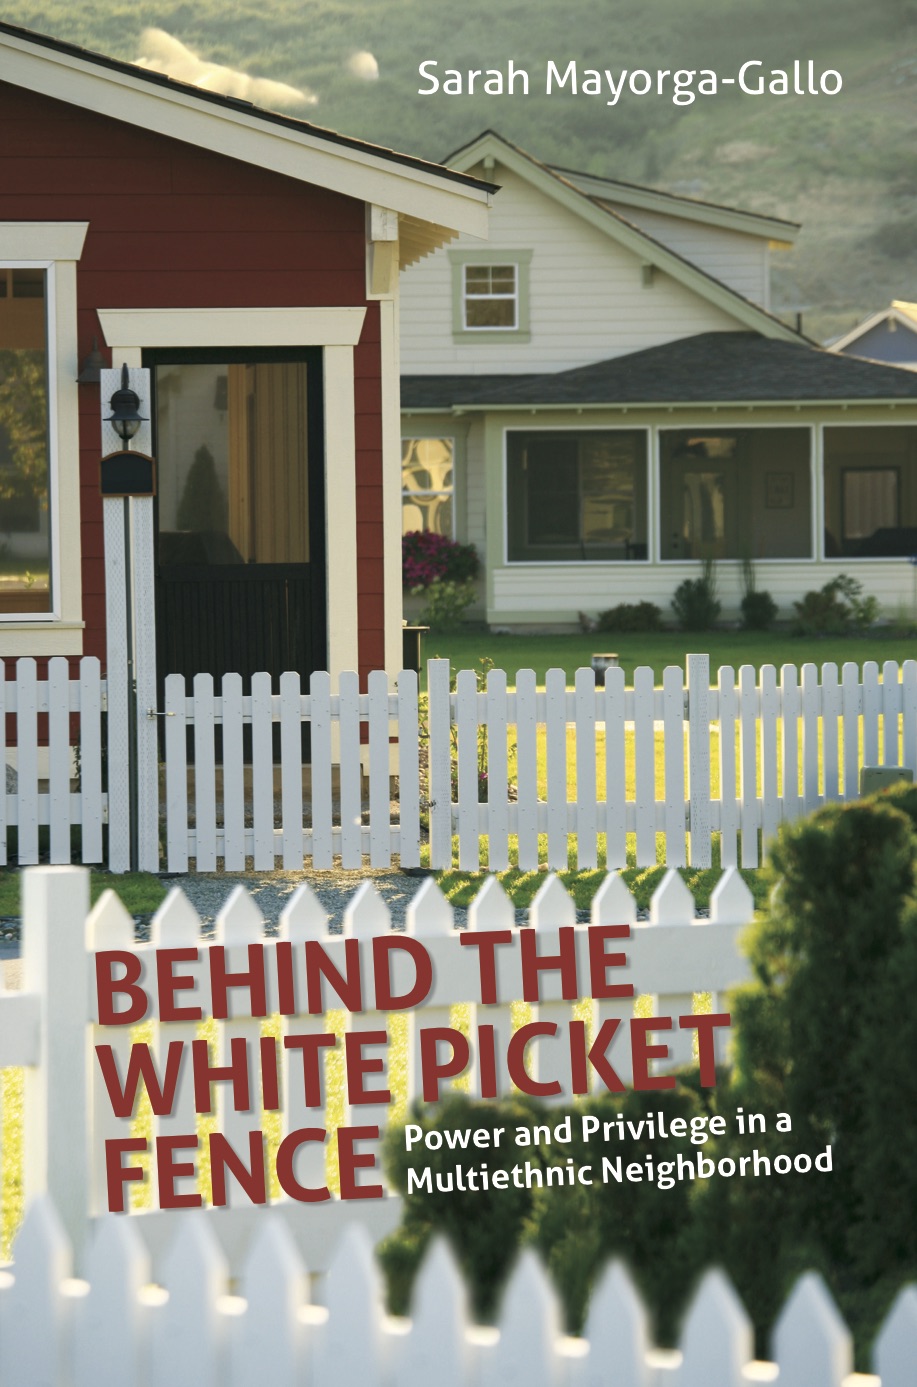 Behind the White Picket Fence book cover